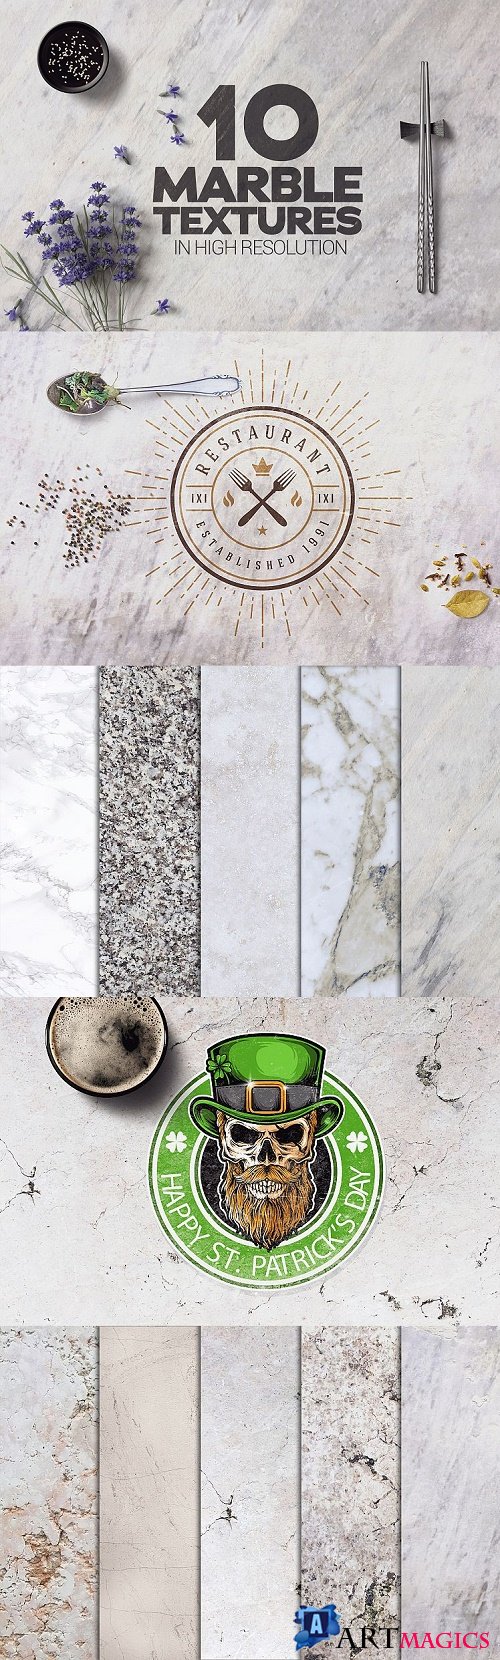 Marble Textures X10 - 266250